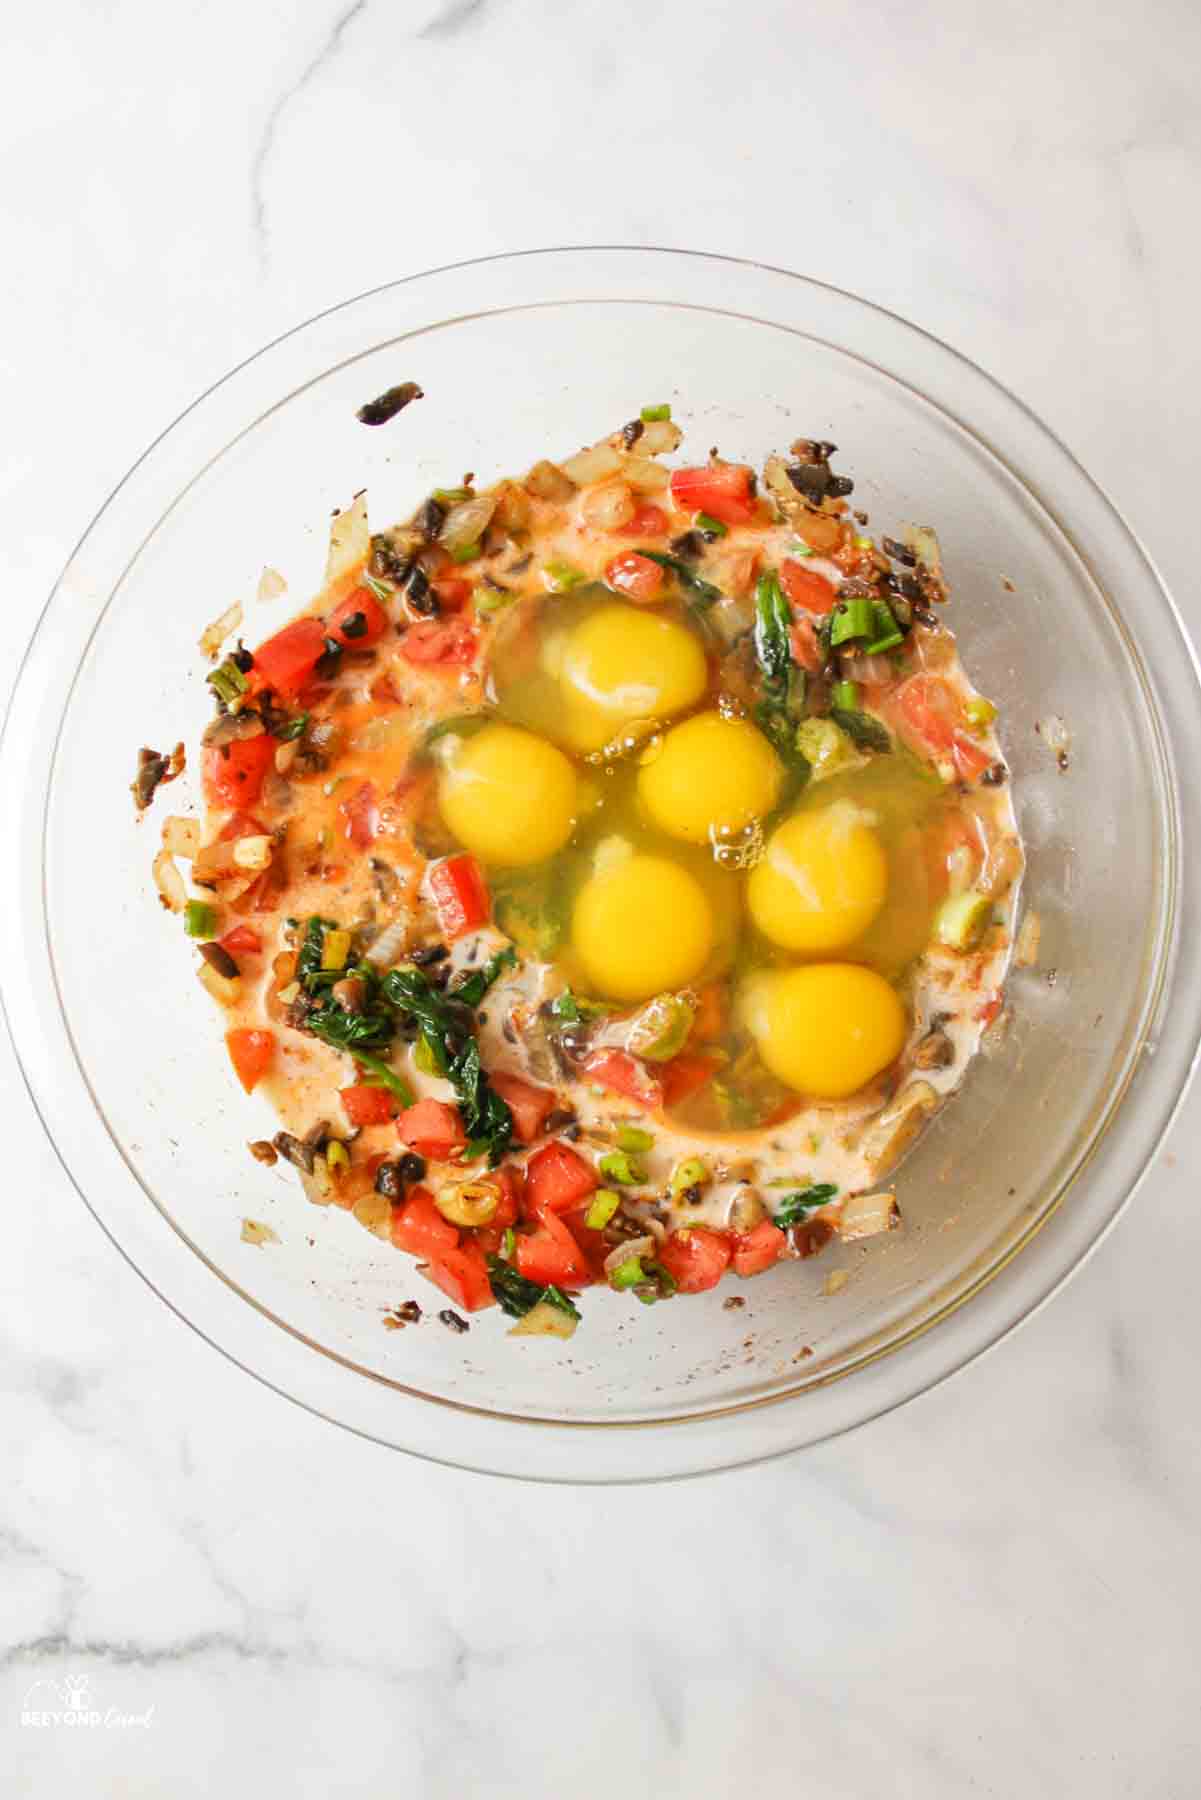 eggs added to veggies in a bowl